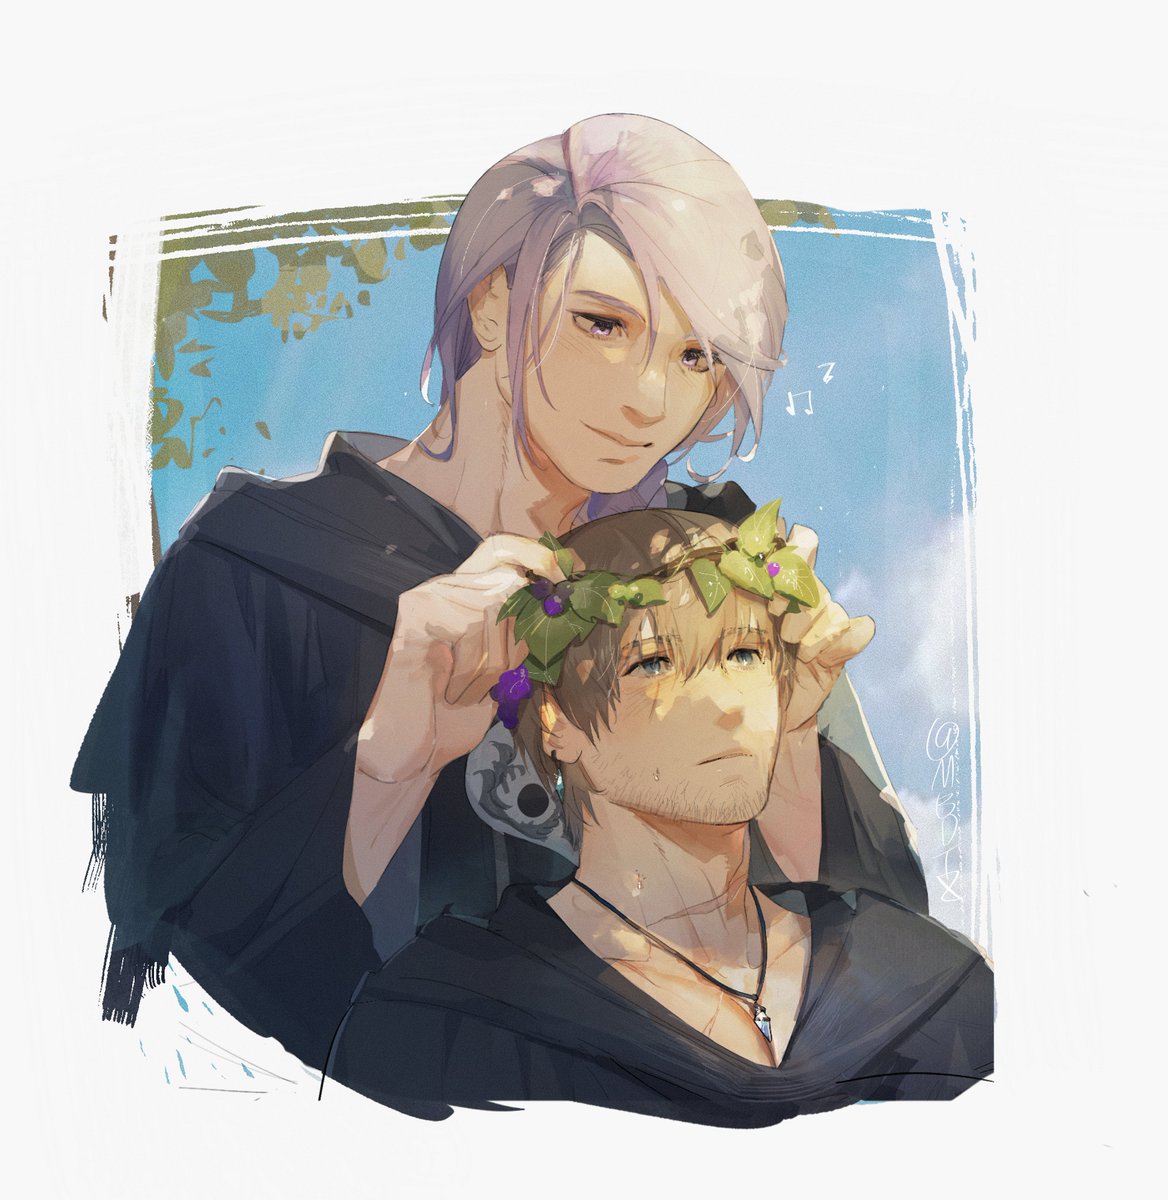 FF14「#FF14 阿谢姆x光和希斯拉德x光 」|奶绿mbdtzのイラスト